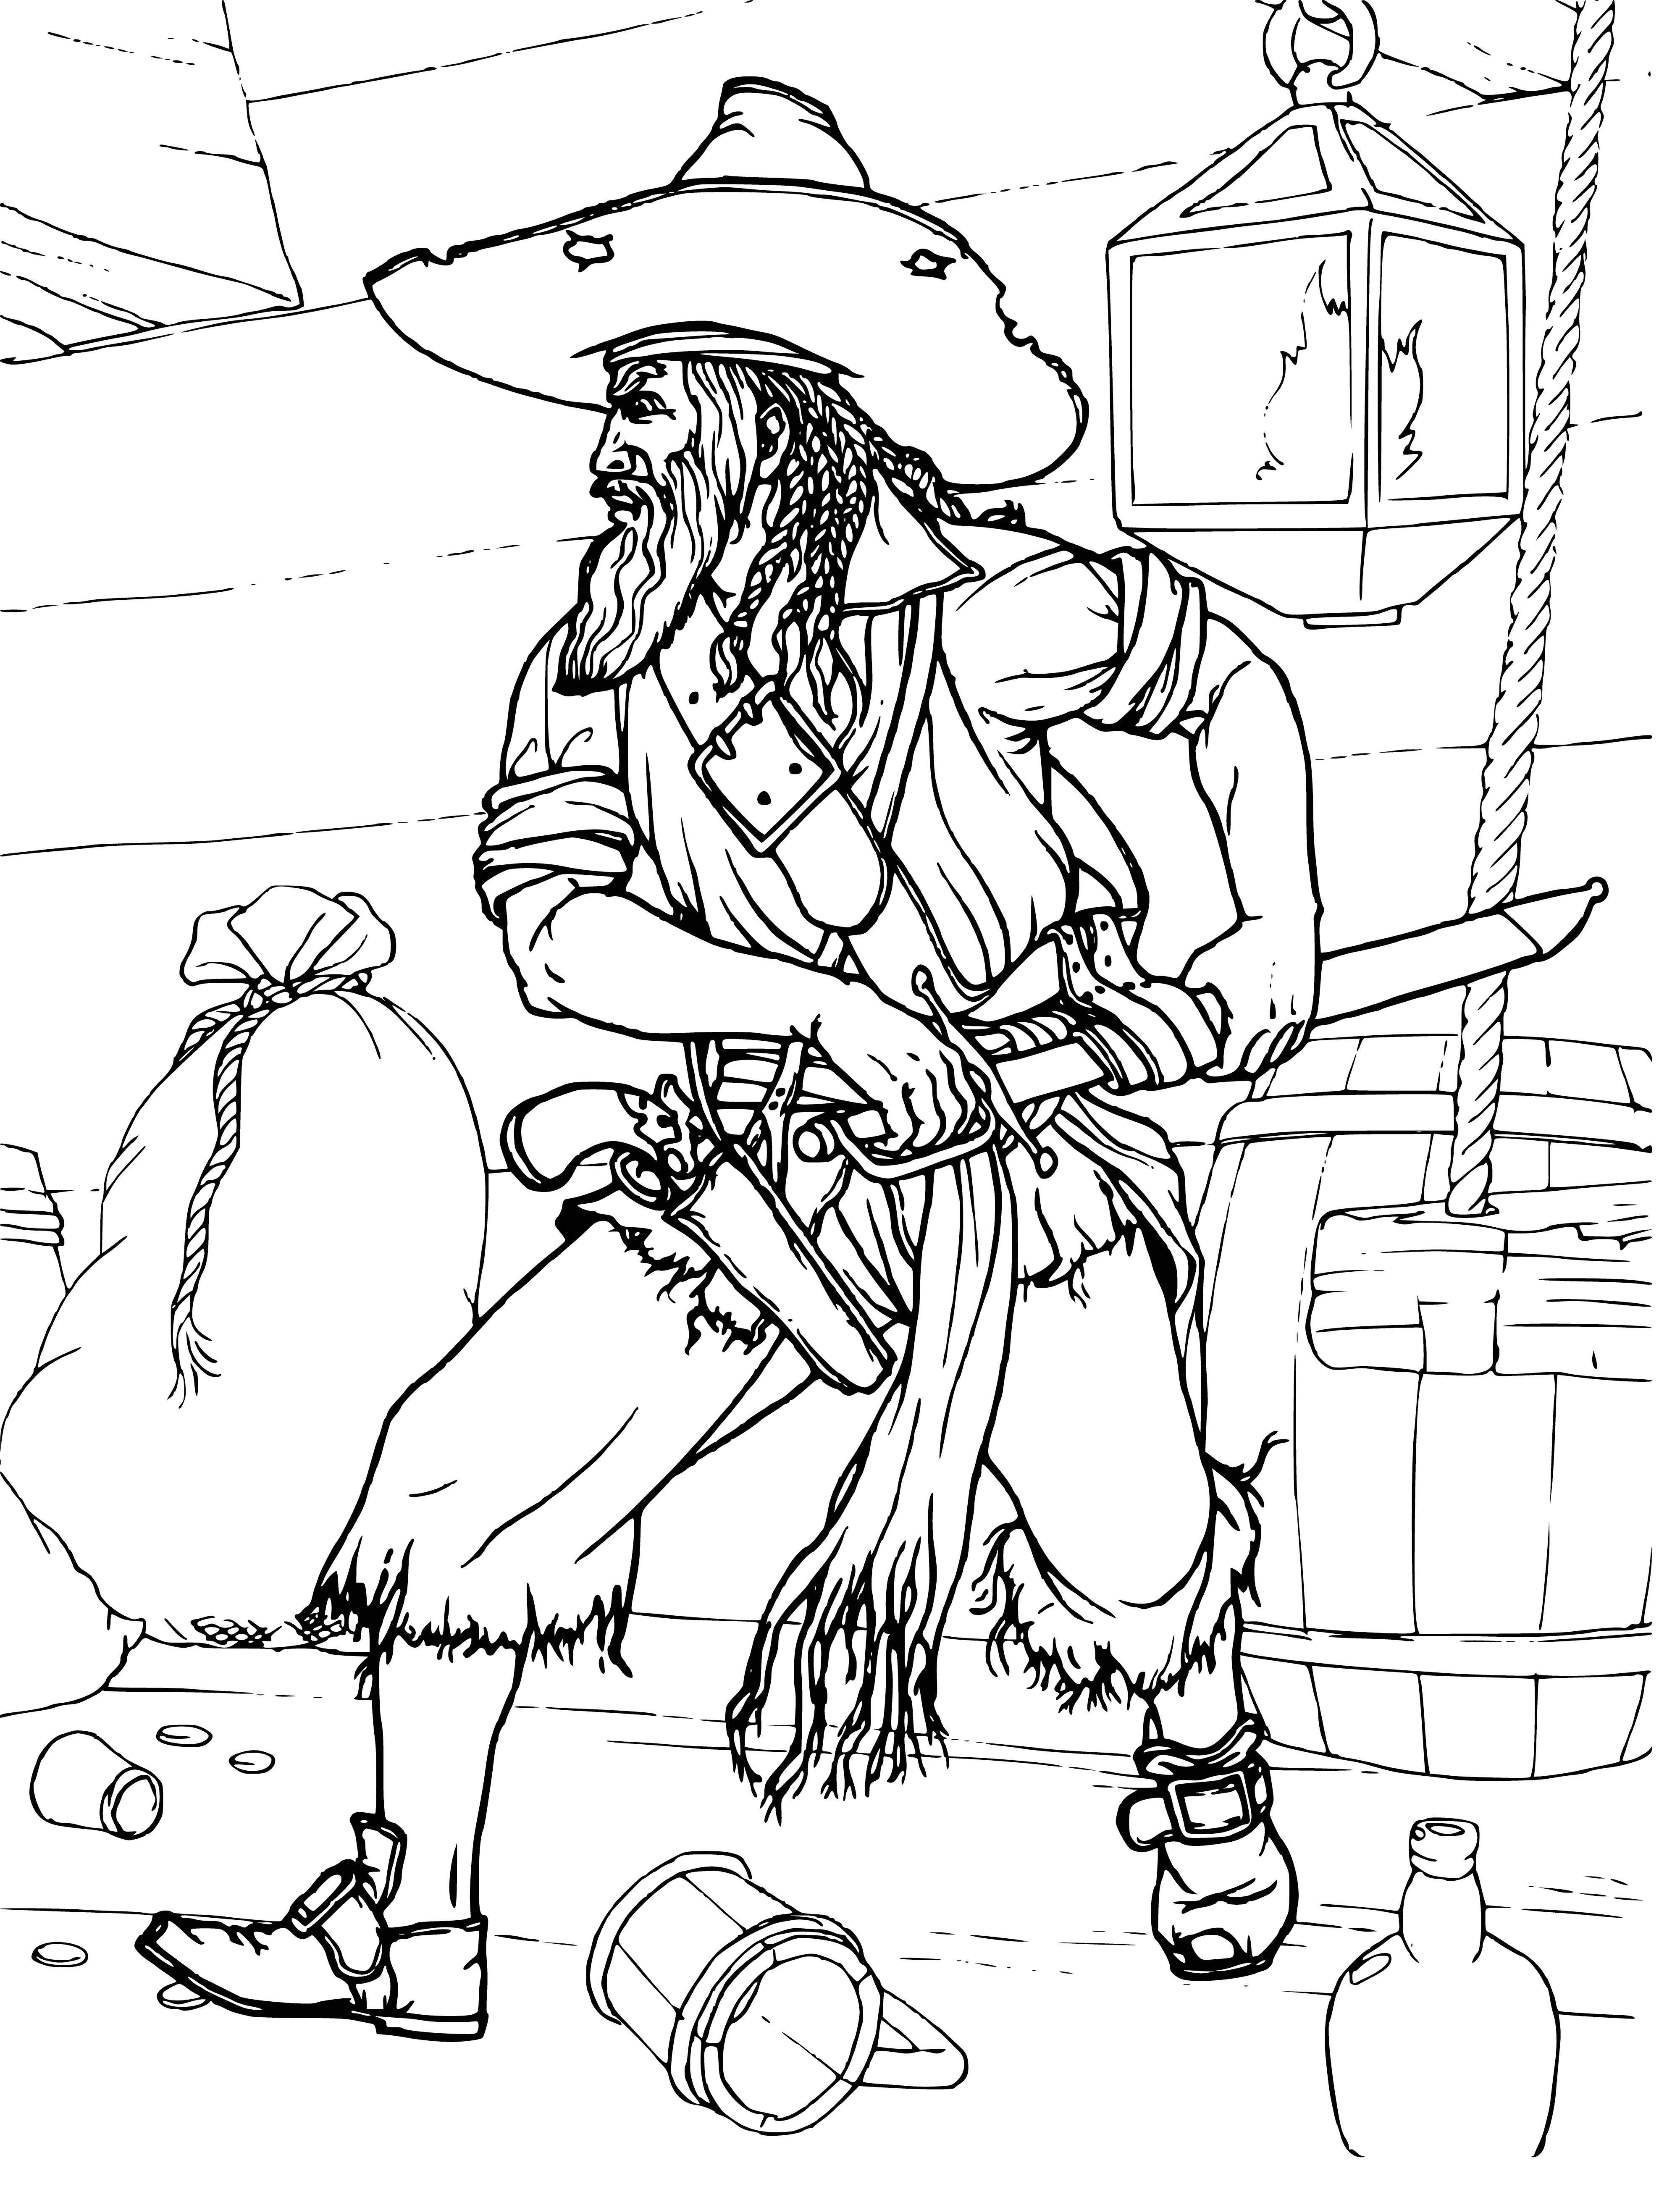 Old pirate coloring page